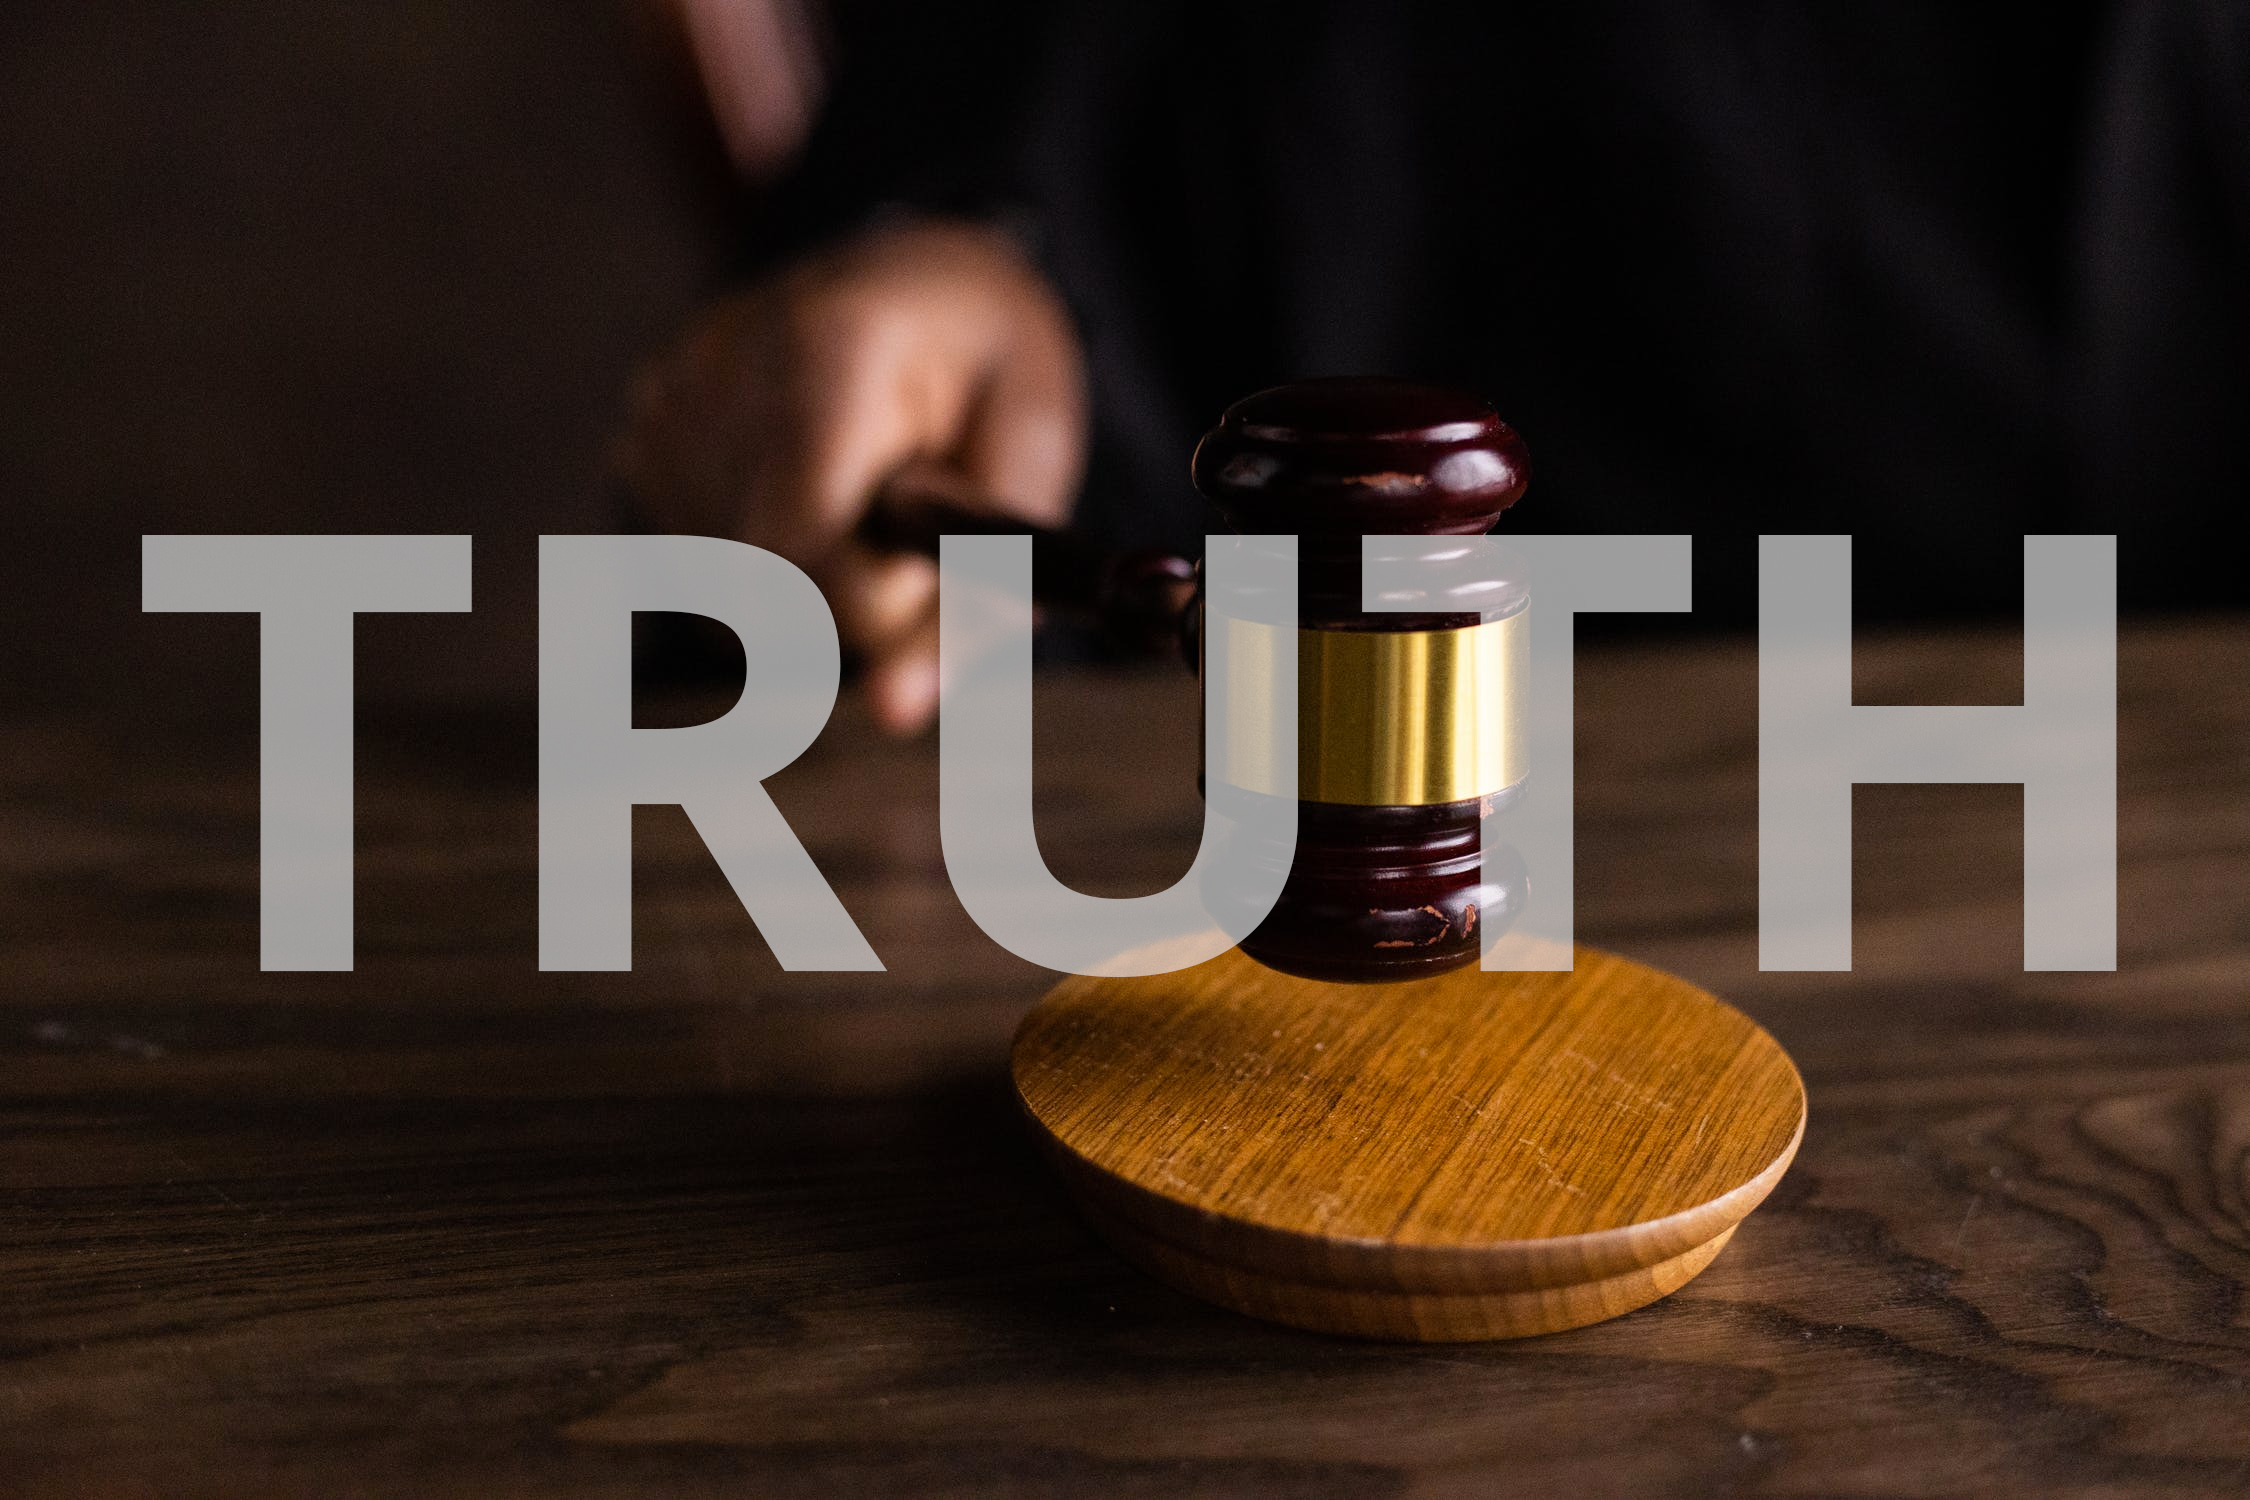 Just law must be grounded in truth